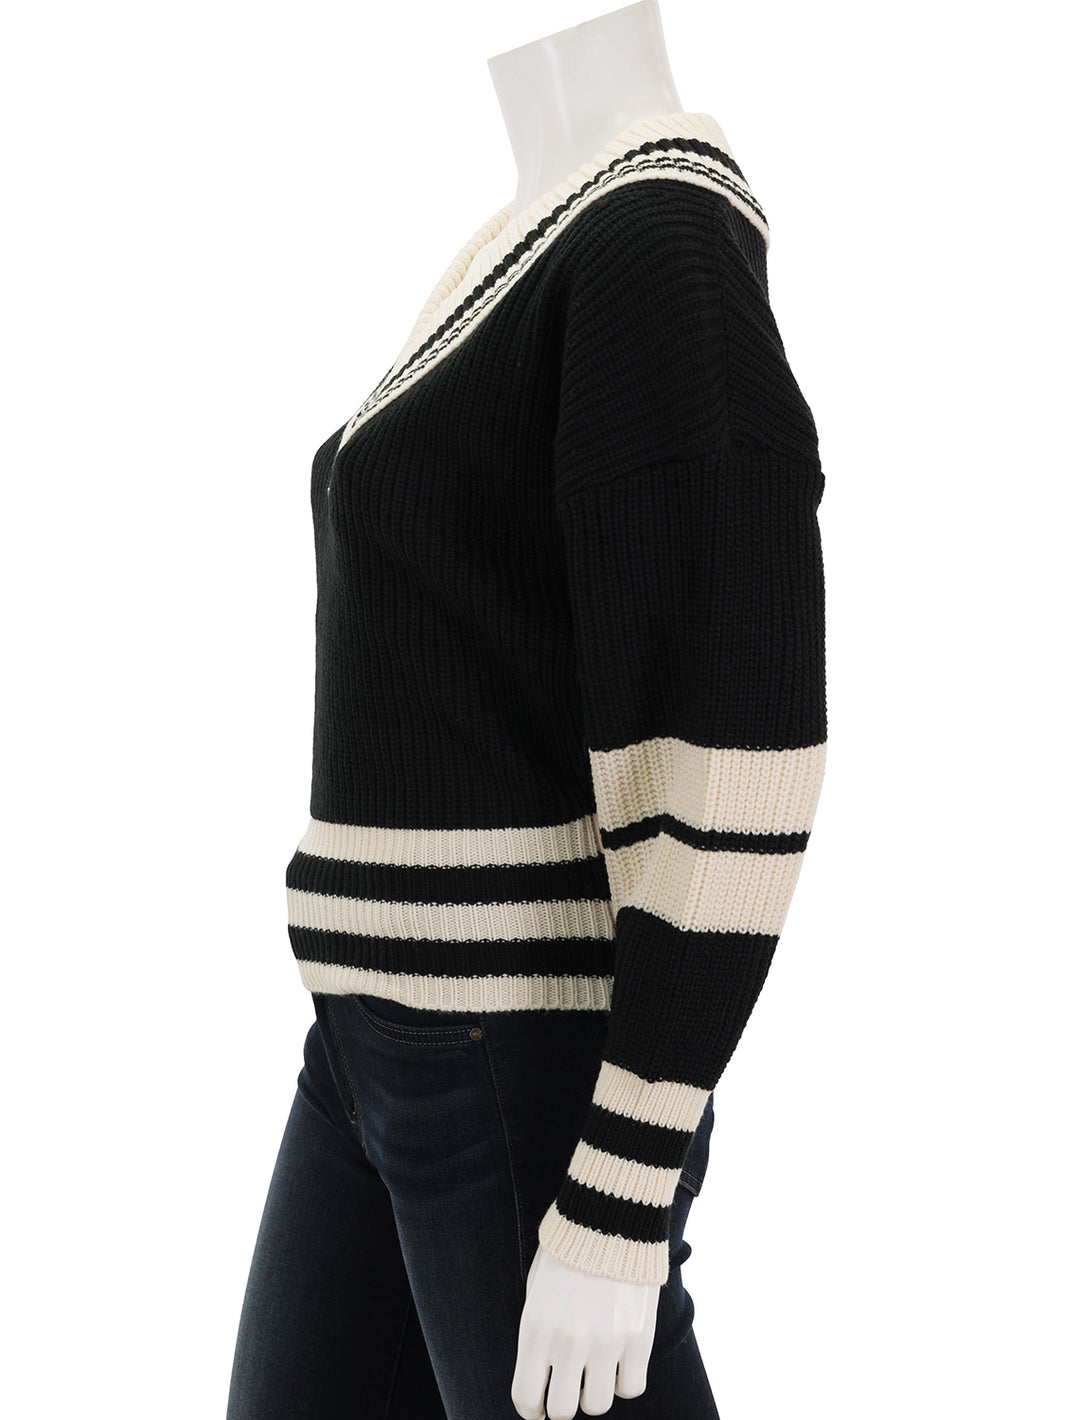 Side view of Steve Madden's jen sweater in black and ivory.